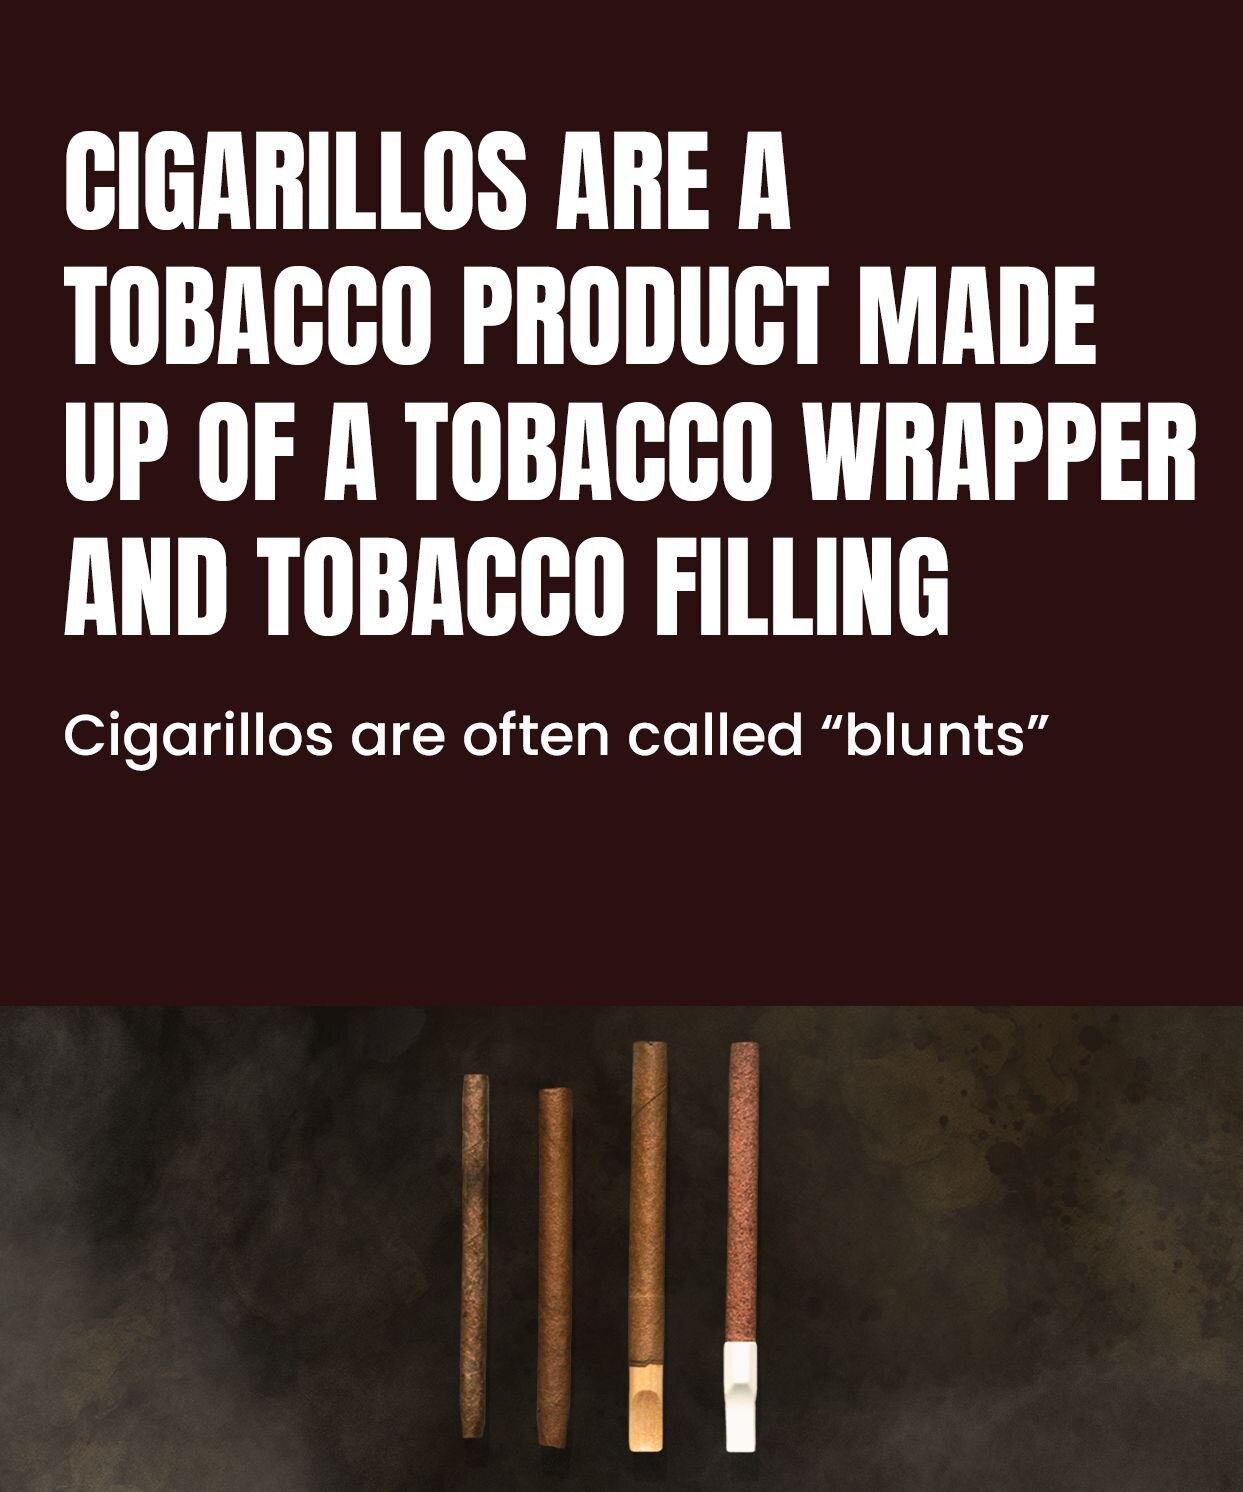 Cigarillos are a tobacco product made of a tobacco wrapper and tobacco filling | cigarillos are often called "blunts"